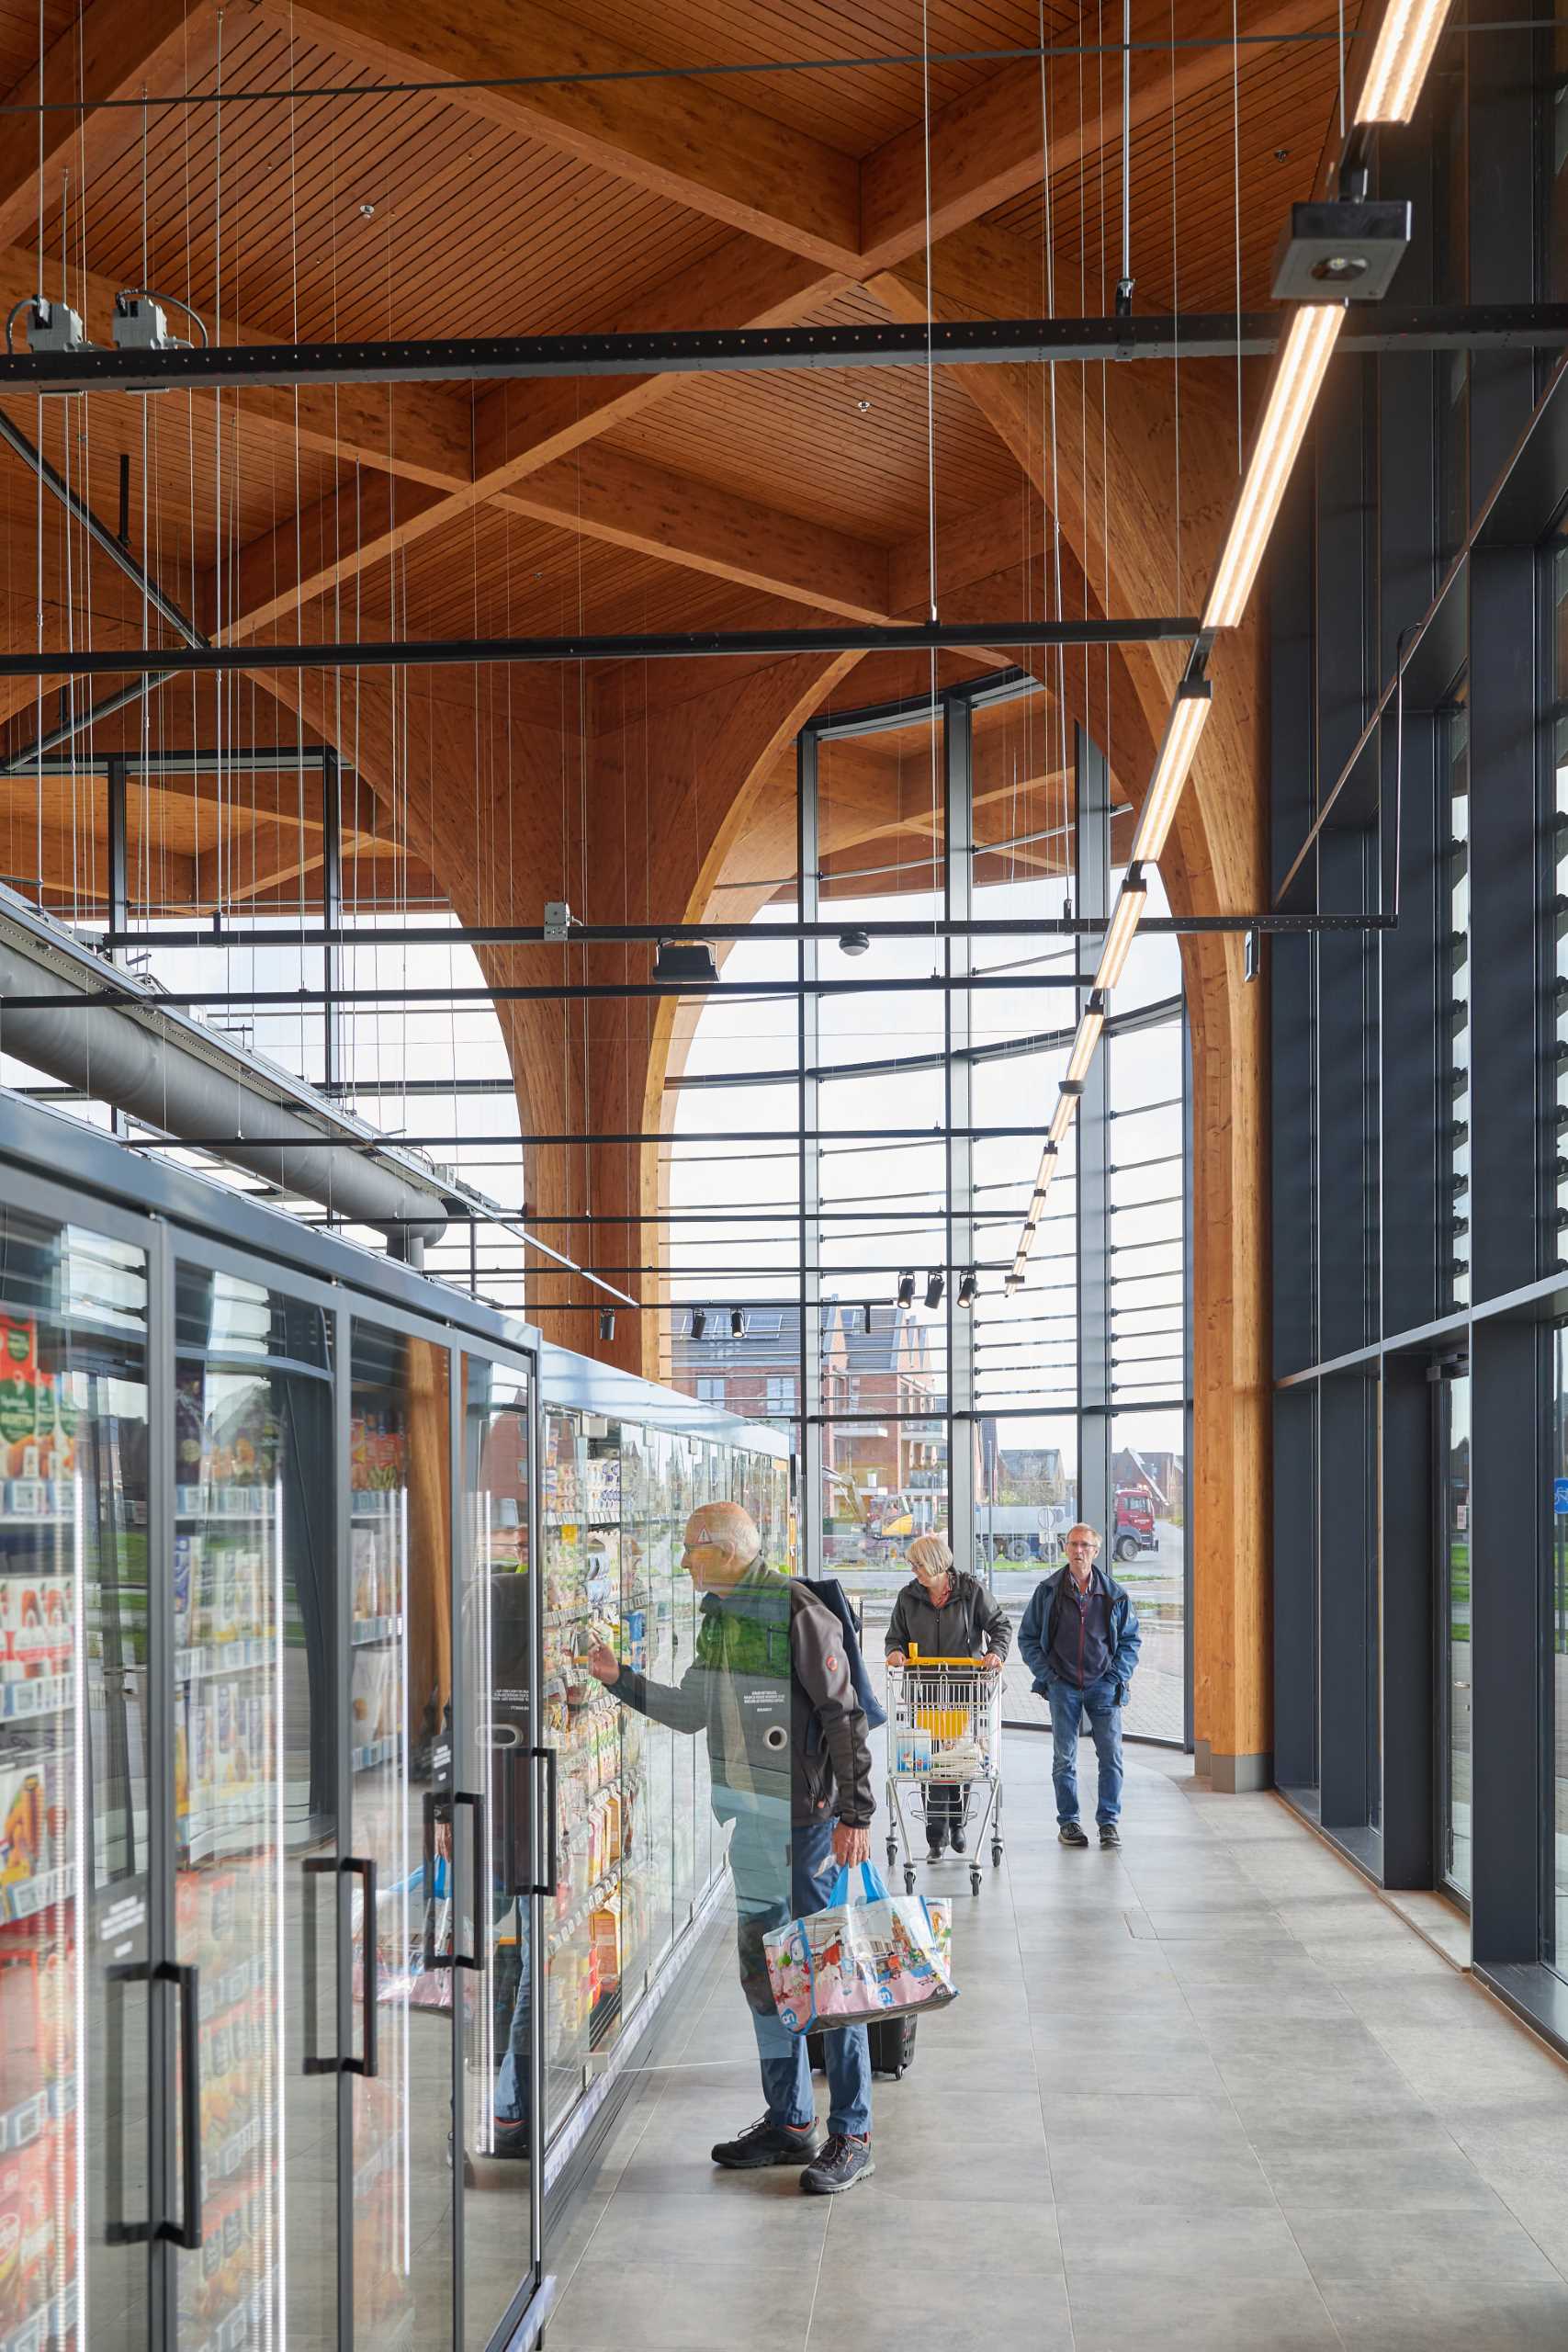 A modern supermarket with an exposed wood structure with a cathedral-like appearance.